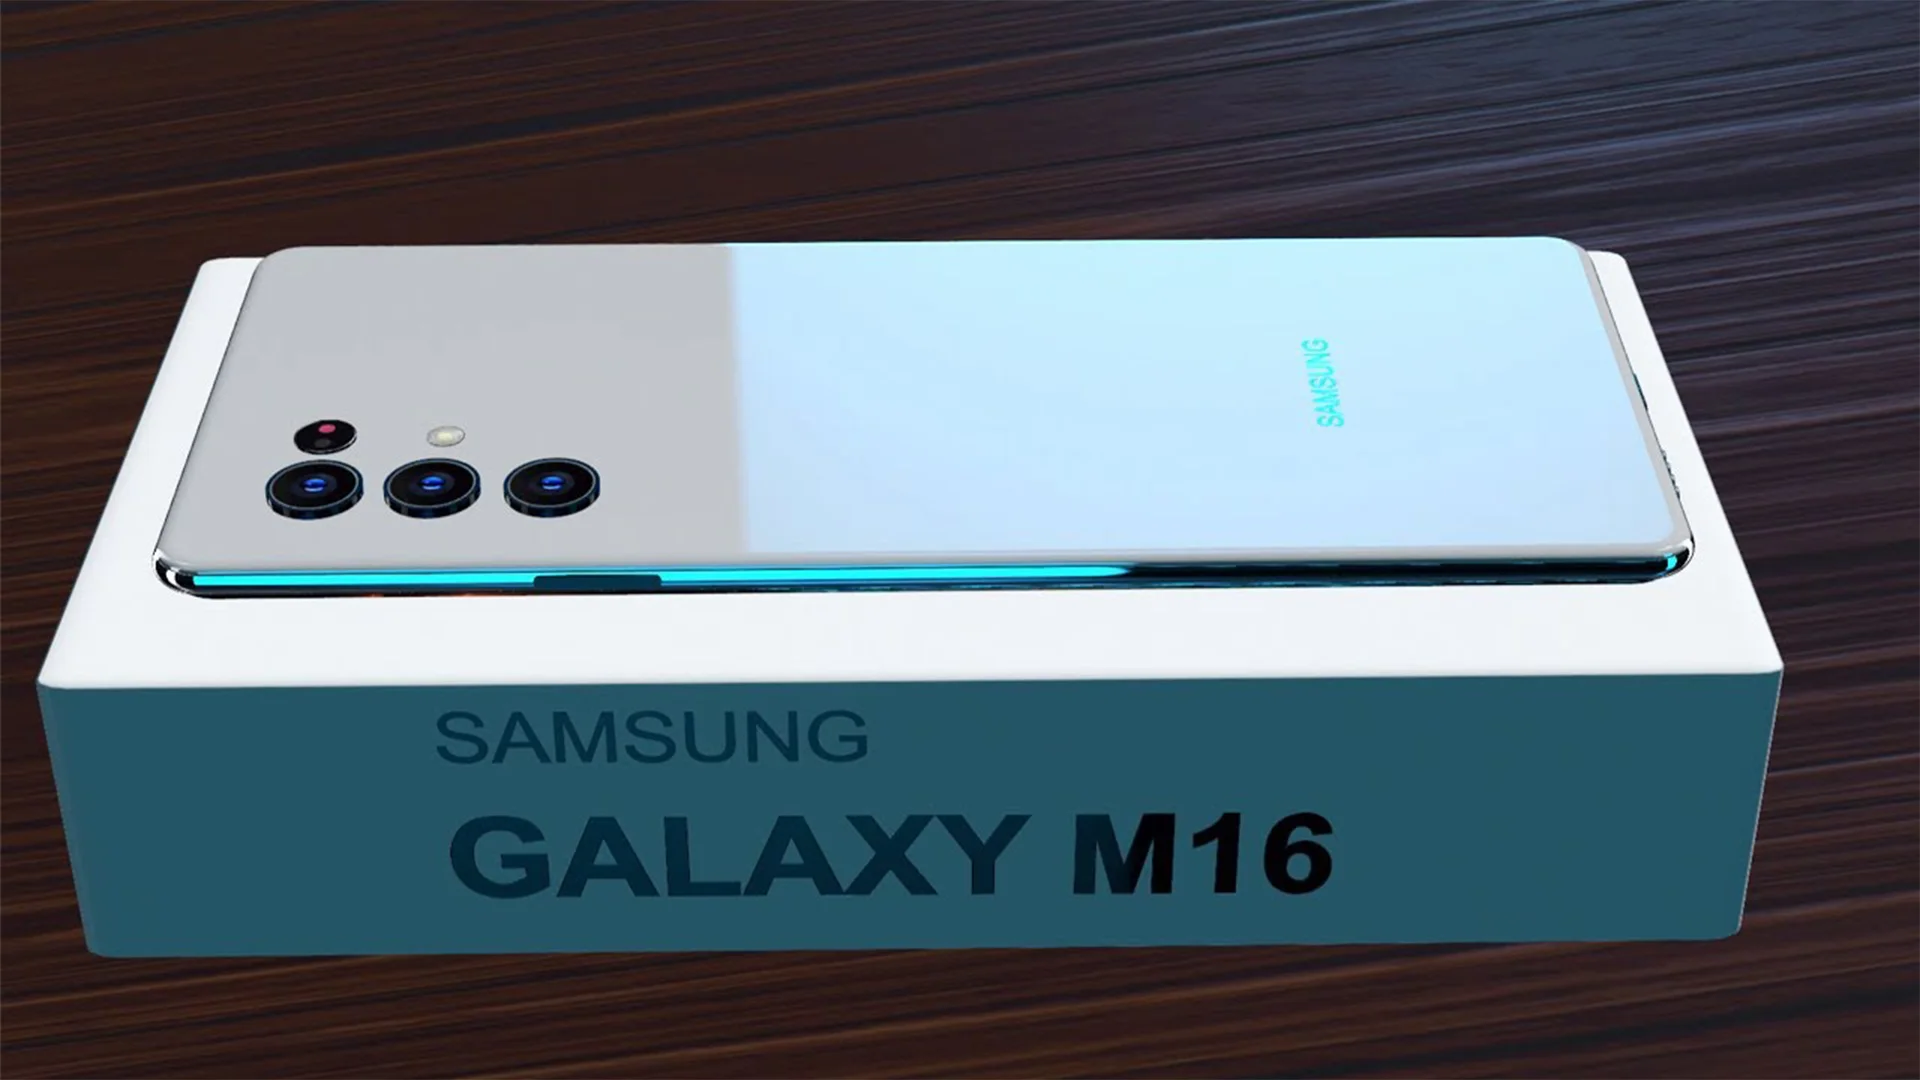 The Buzz around the Samsung Galaxy M16 - Leaks and Insights